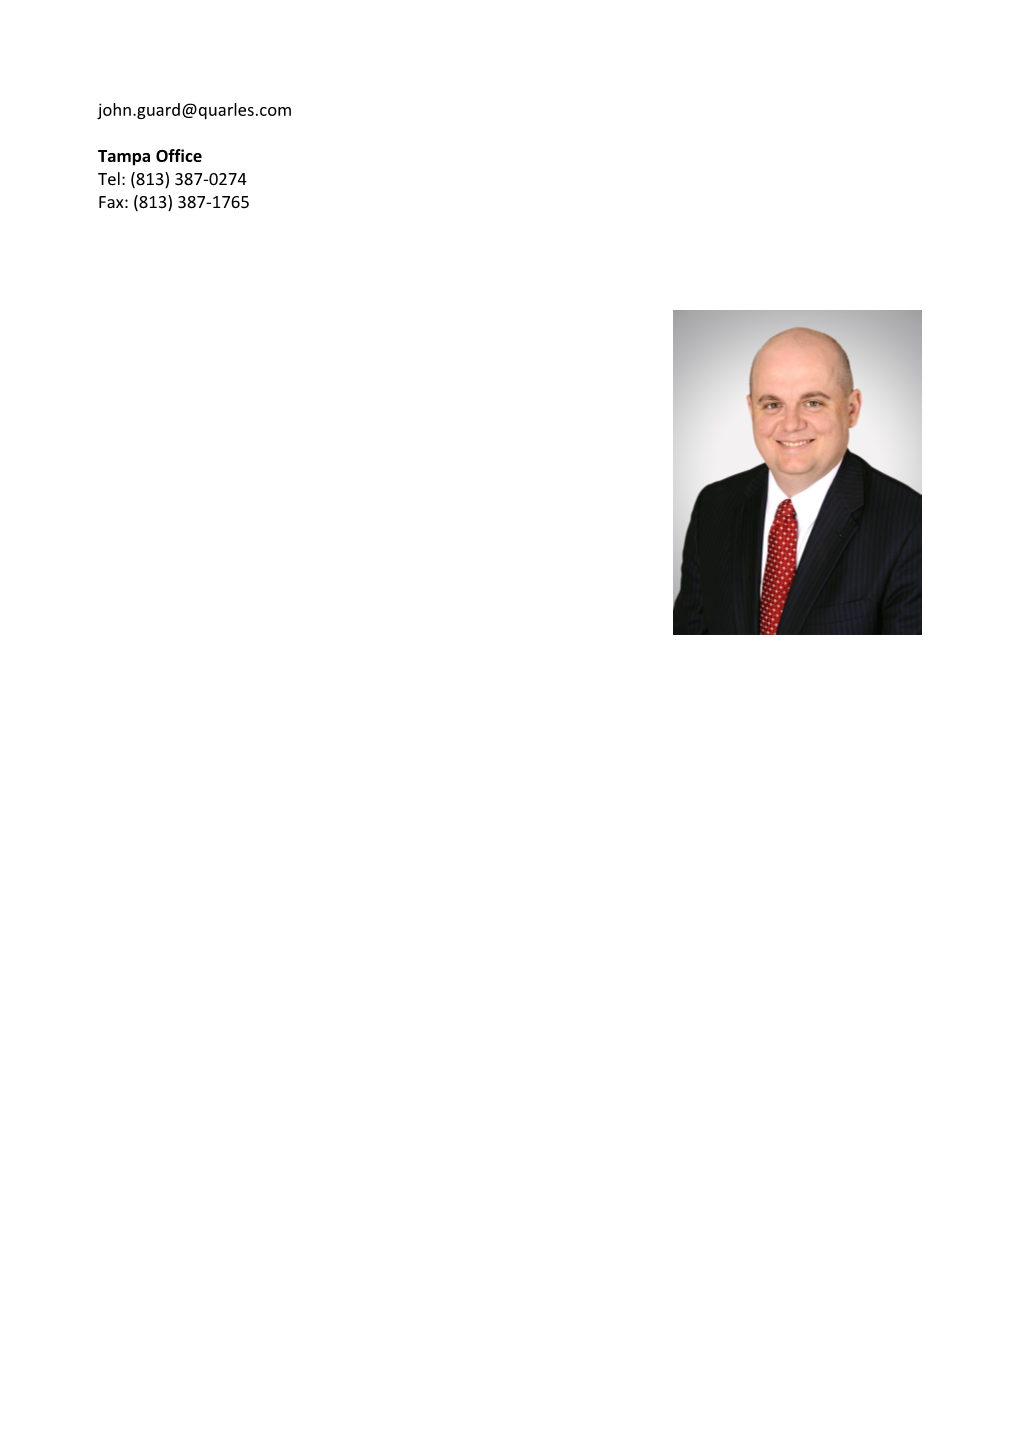 John M. Guard Is an Experienced Commercial Litigator, Who Frequently Handles a Wide Variety